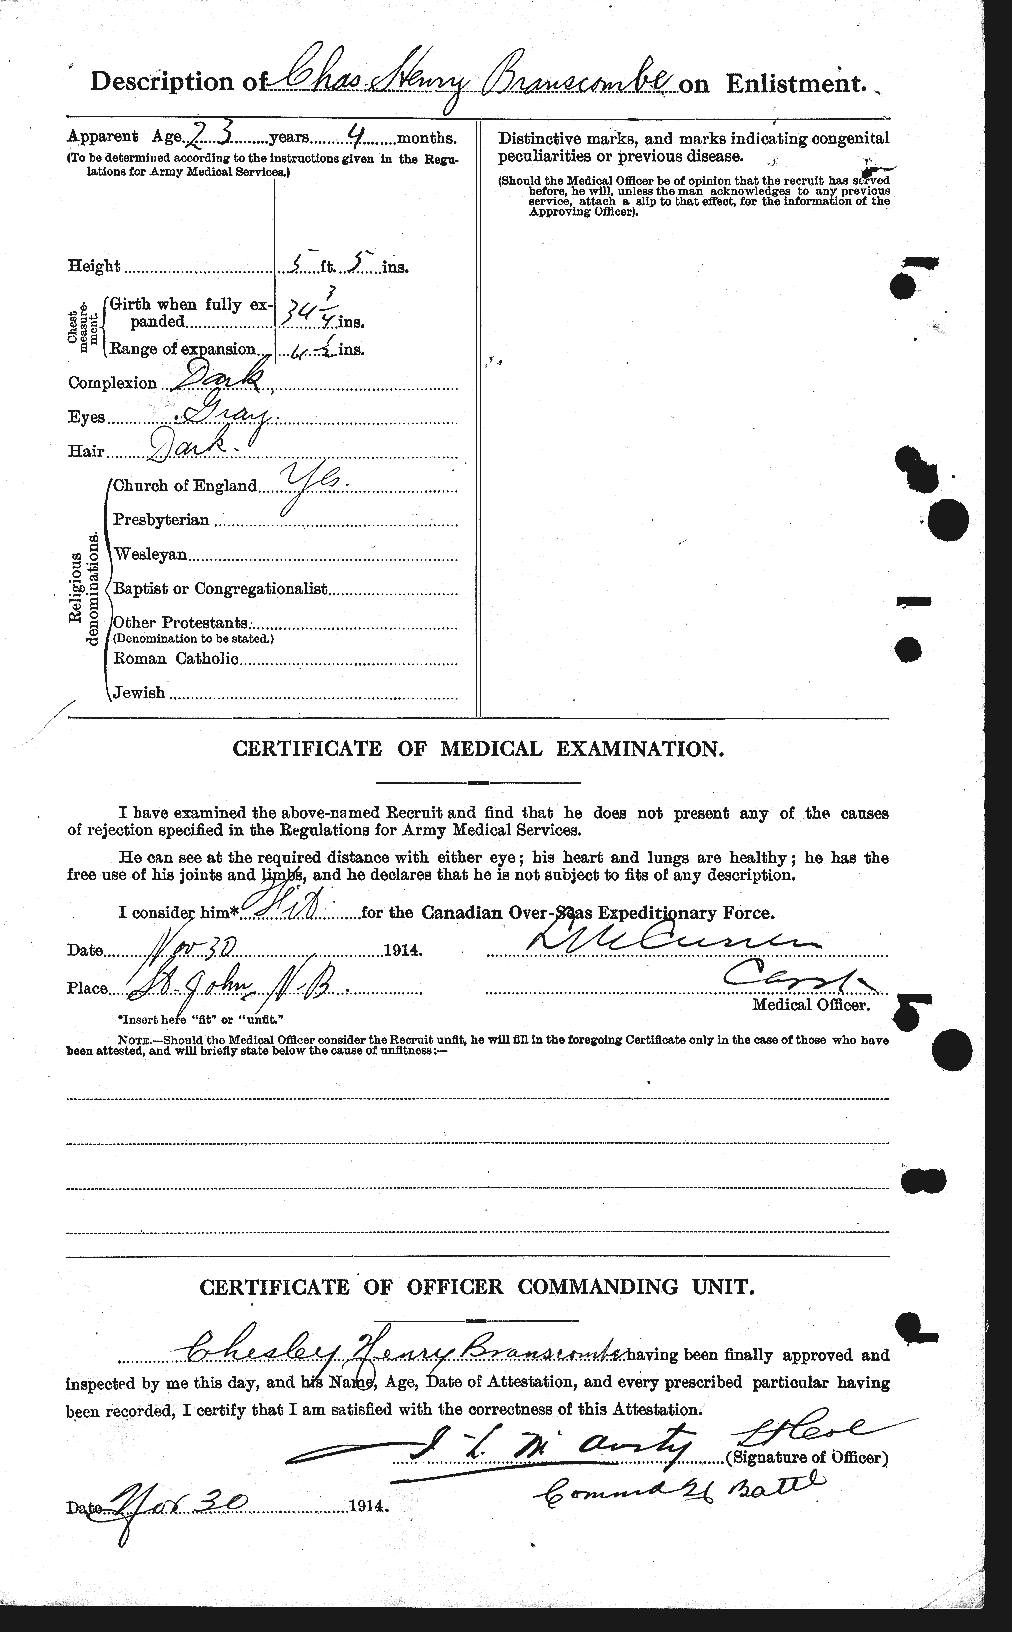 Personnel Records of the First World War - CEF 257794b